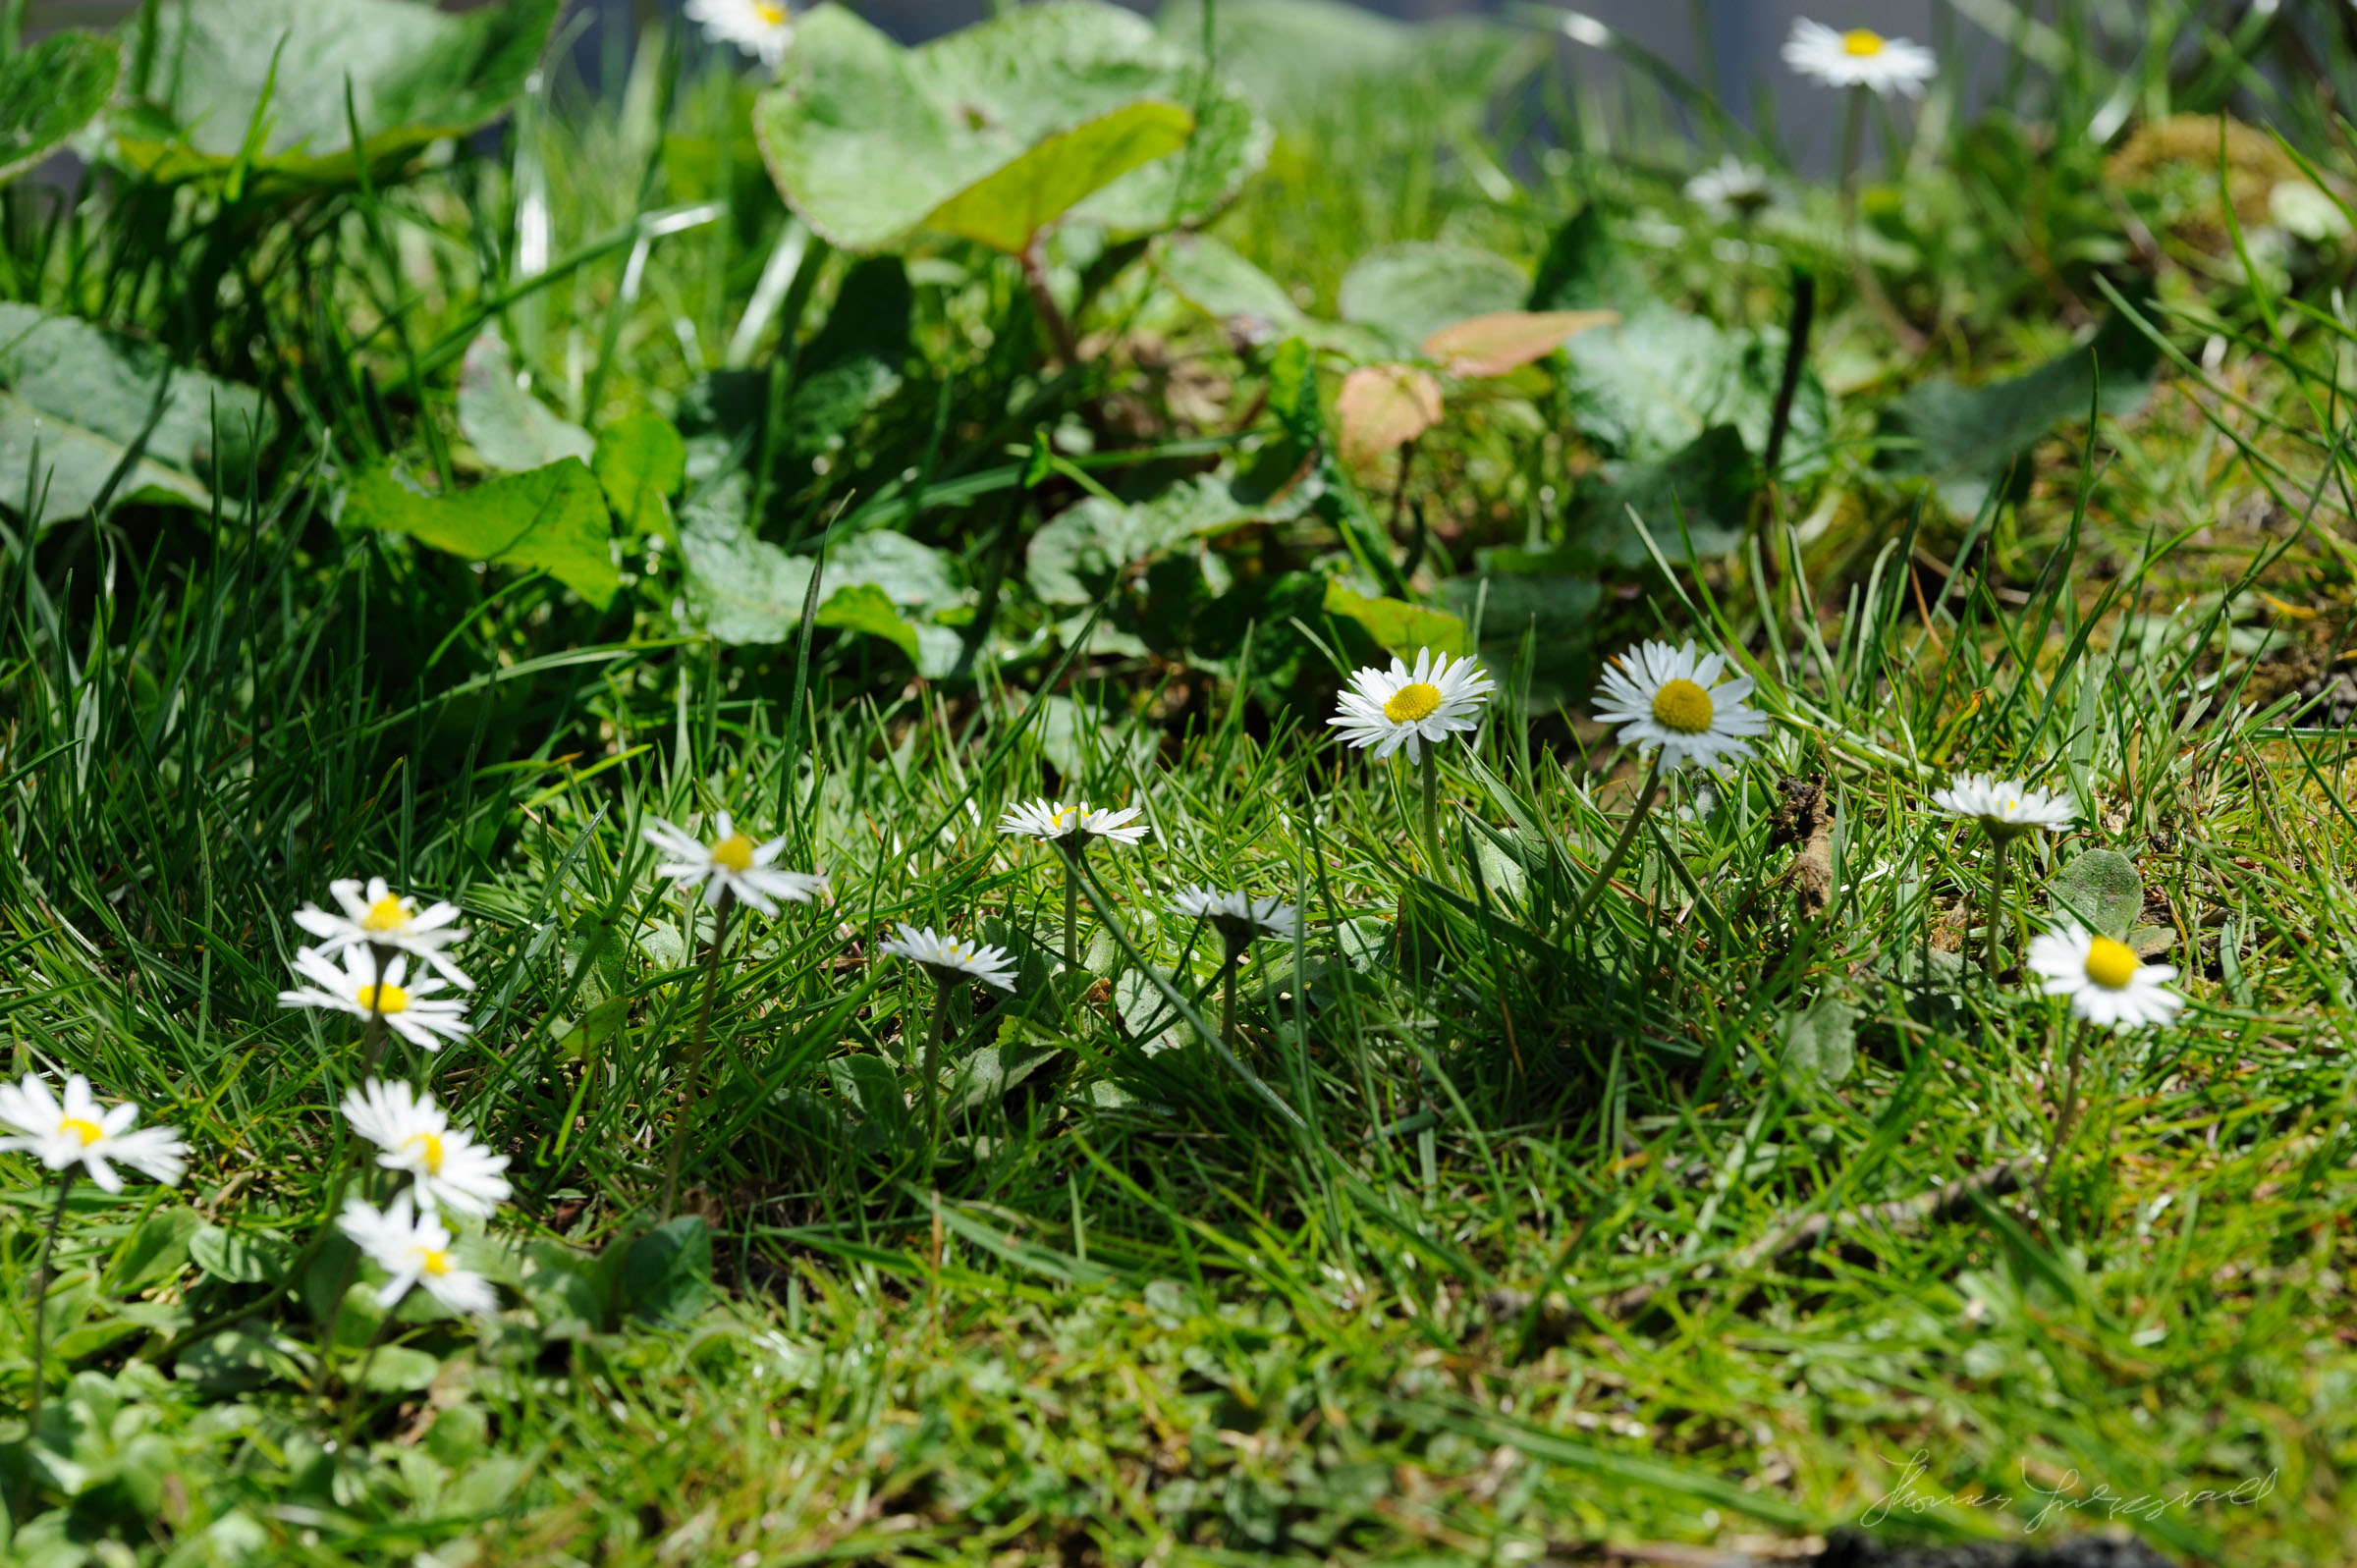 Dasies on the Grass by the Canal